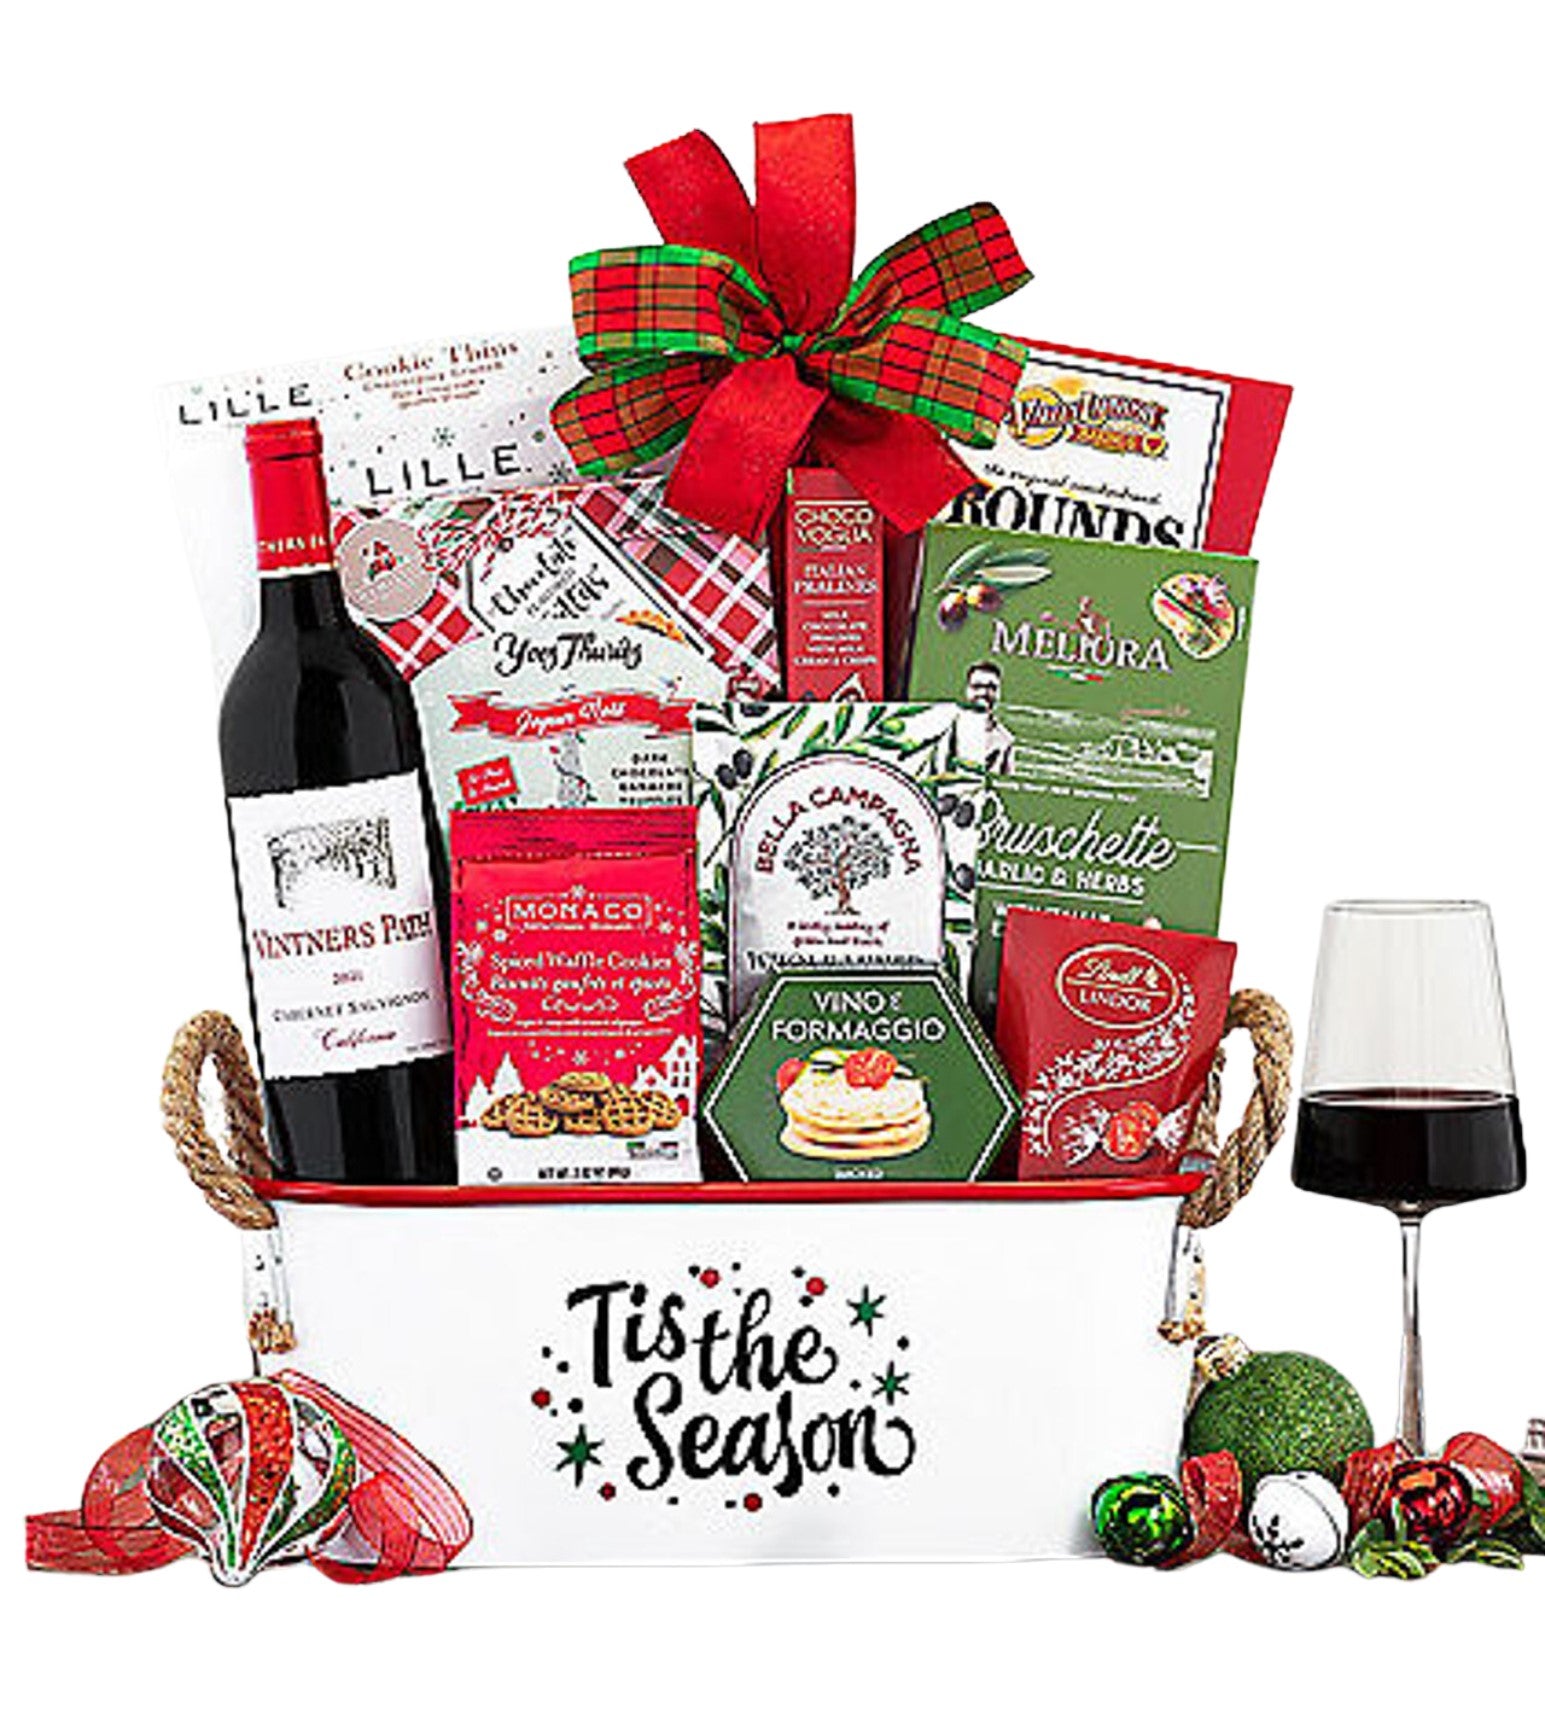 Wine Gift Baskets - The Wine Cart - Blooms New Jersey